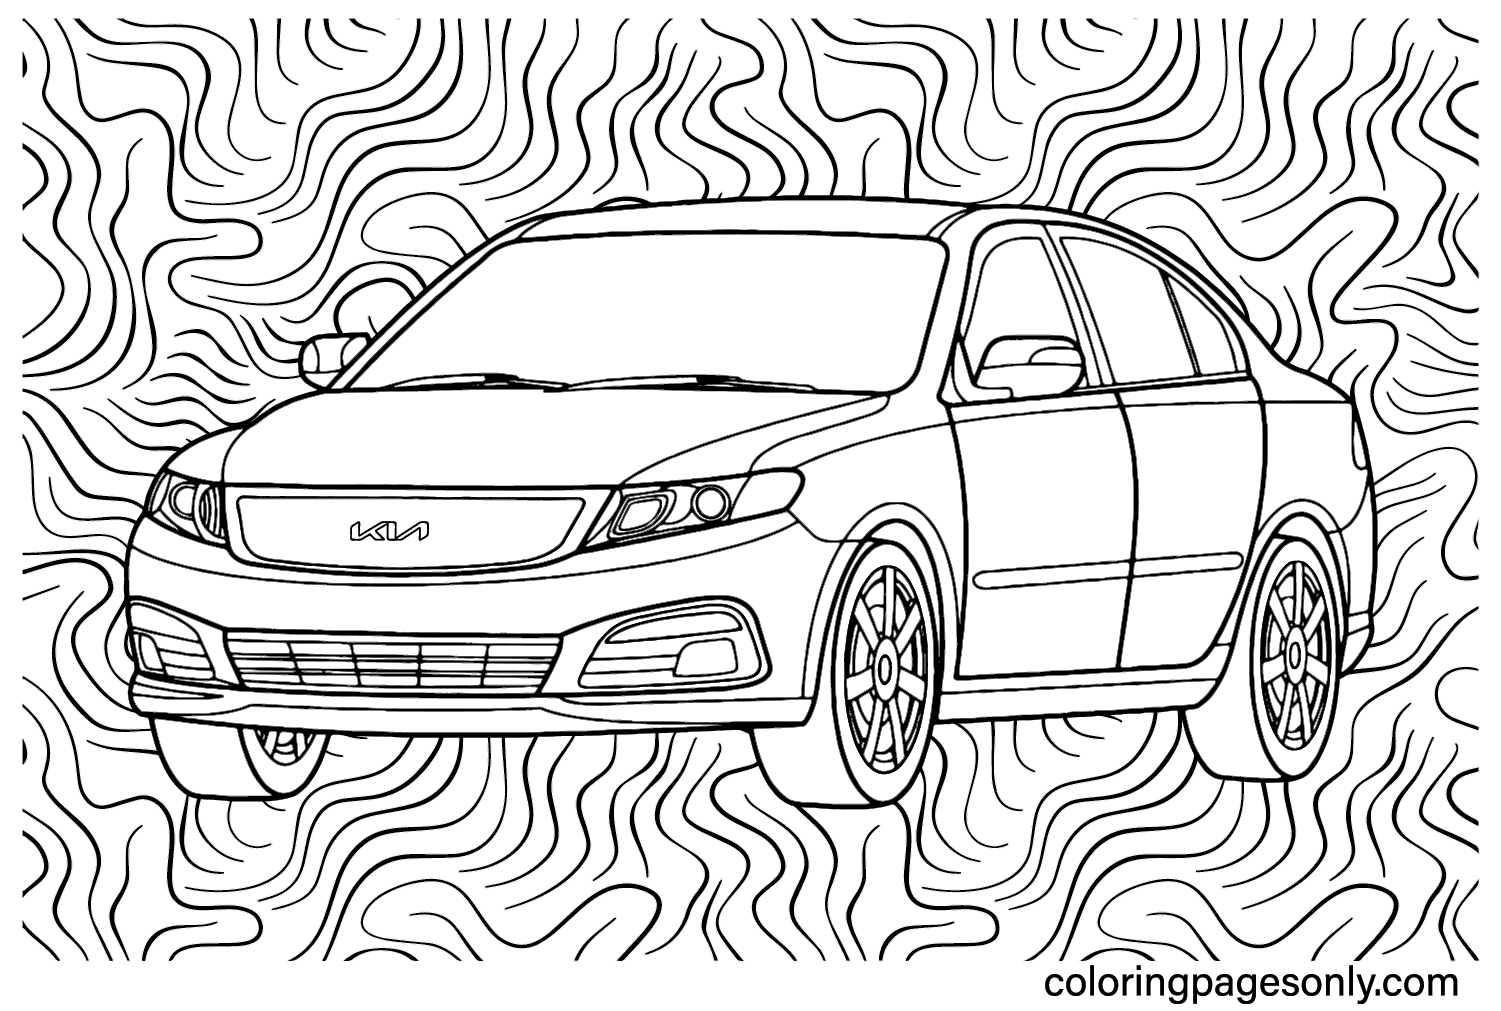 Kia Optima Coloring Page - Free Printable Coloring Pages